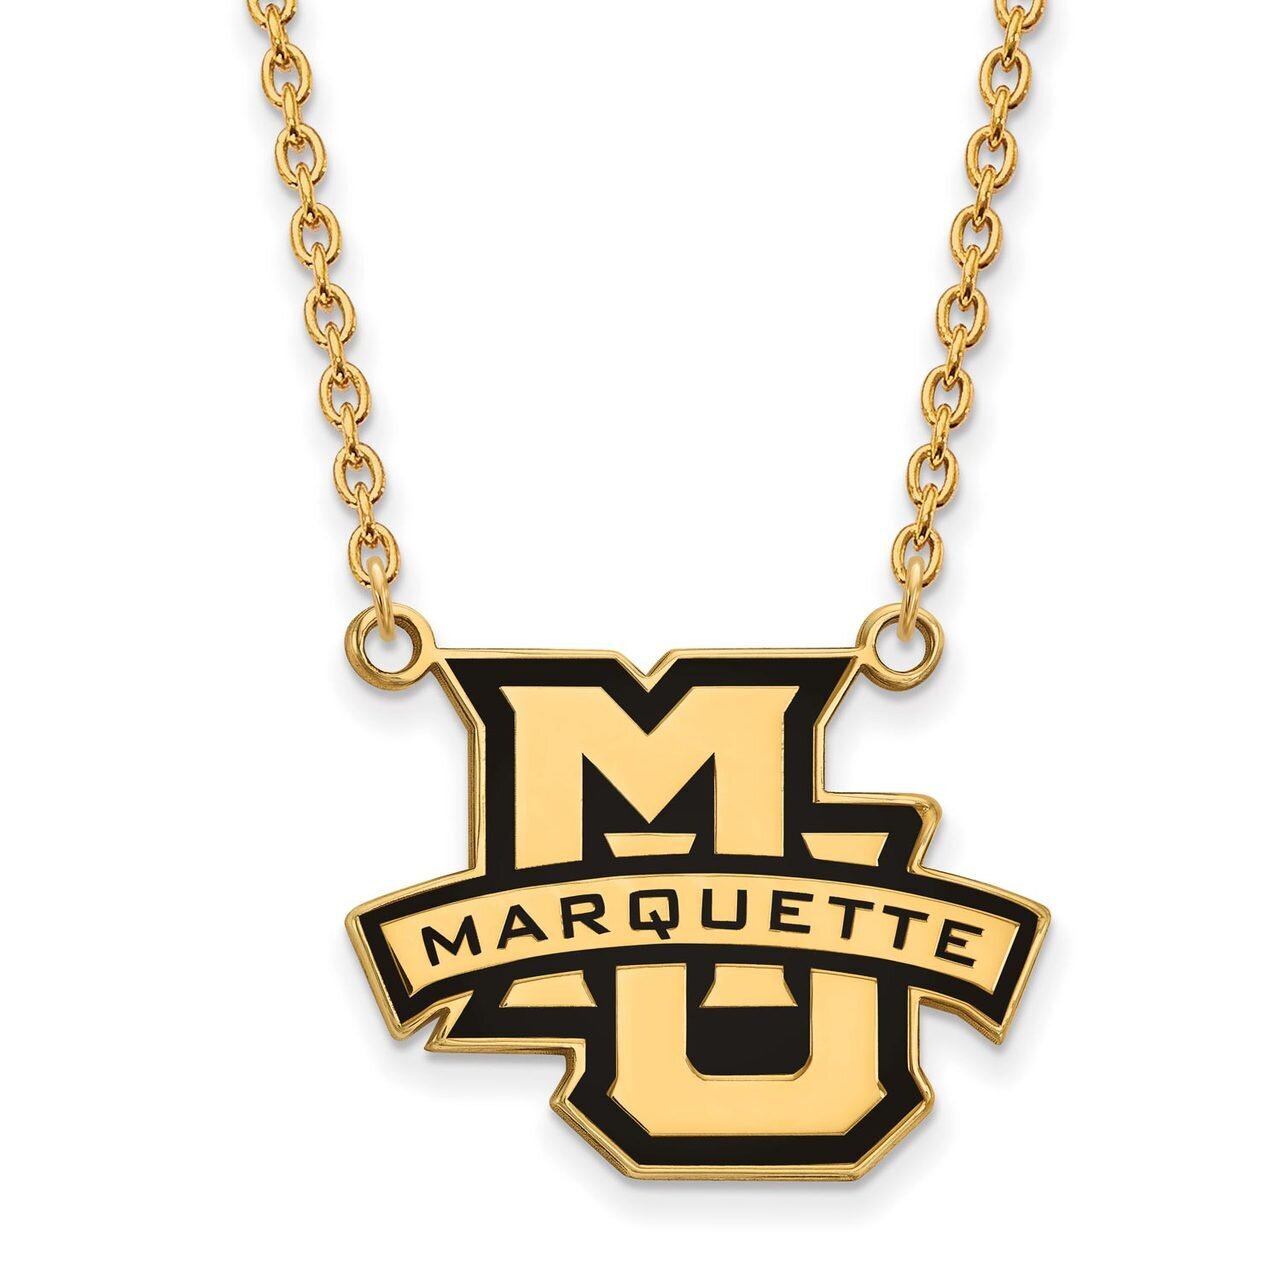 Marquette University Large Enamel Pendant with Chain Necklace Gold-plated Silver GP030MAR-18